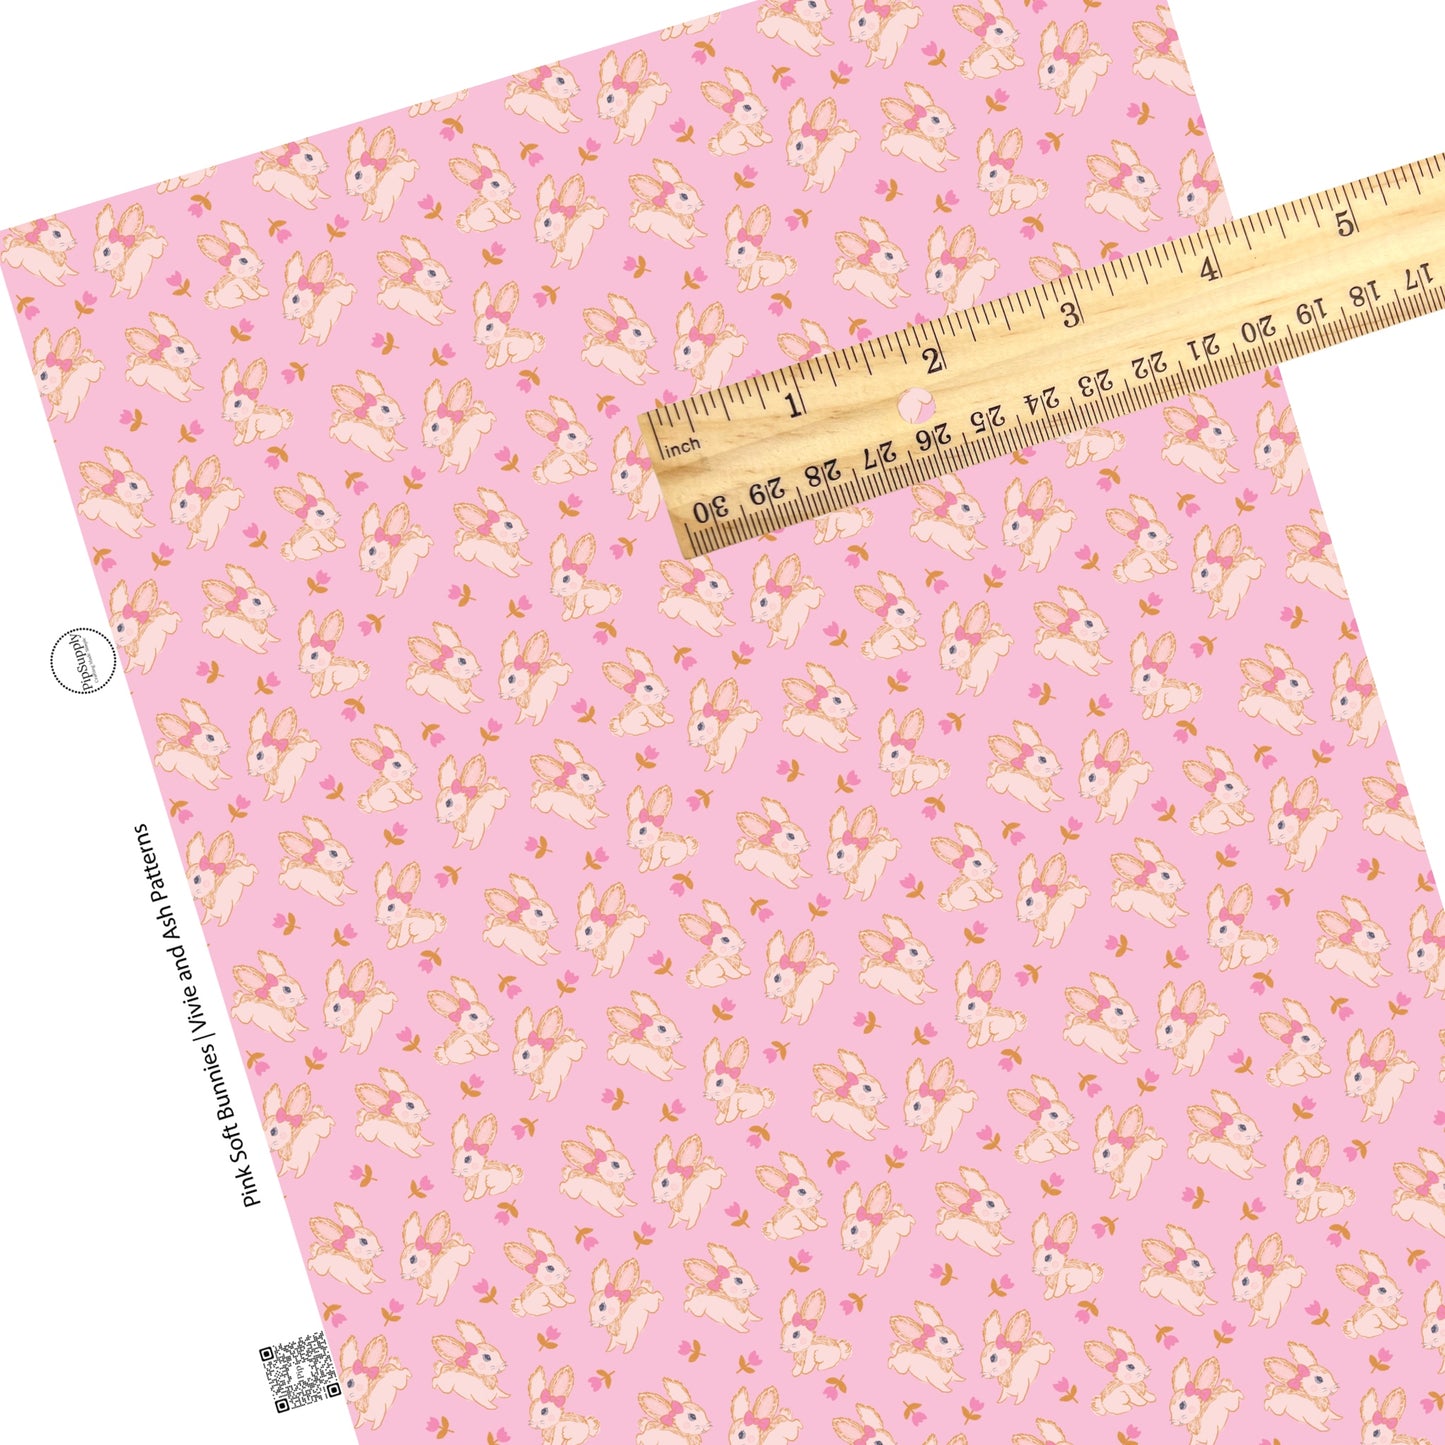 These spring pattern themed faux leather sheets contain the following design elements: pink tulips surrounding cream bunnies on light pink. Our CPSIA compliant faux leather sheets or rolls can be used for all types of crafting projects.